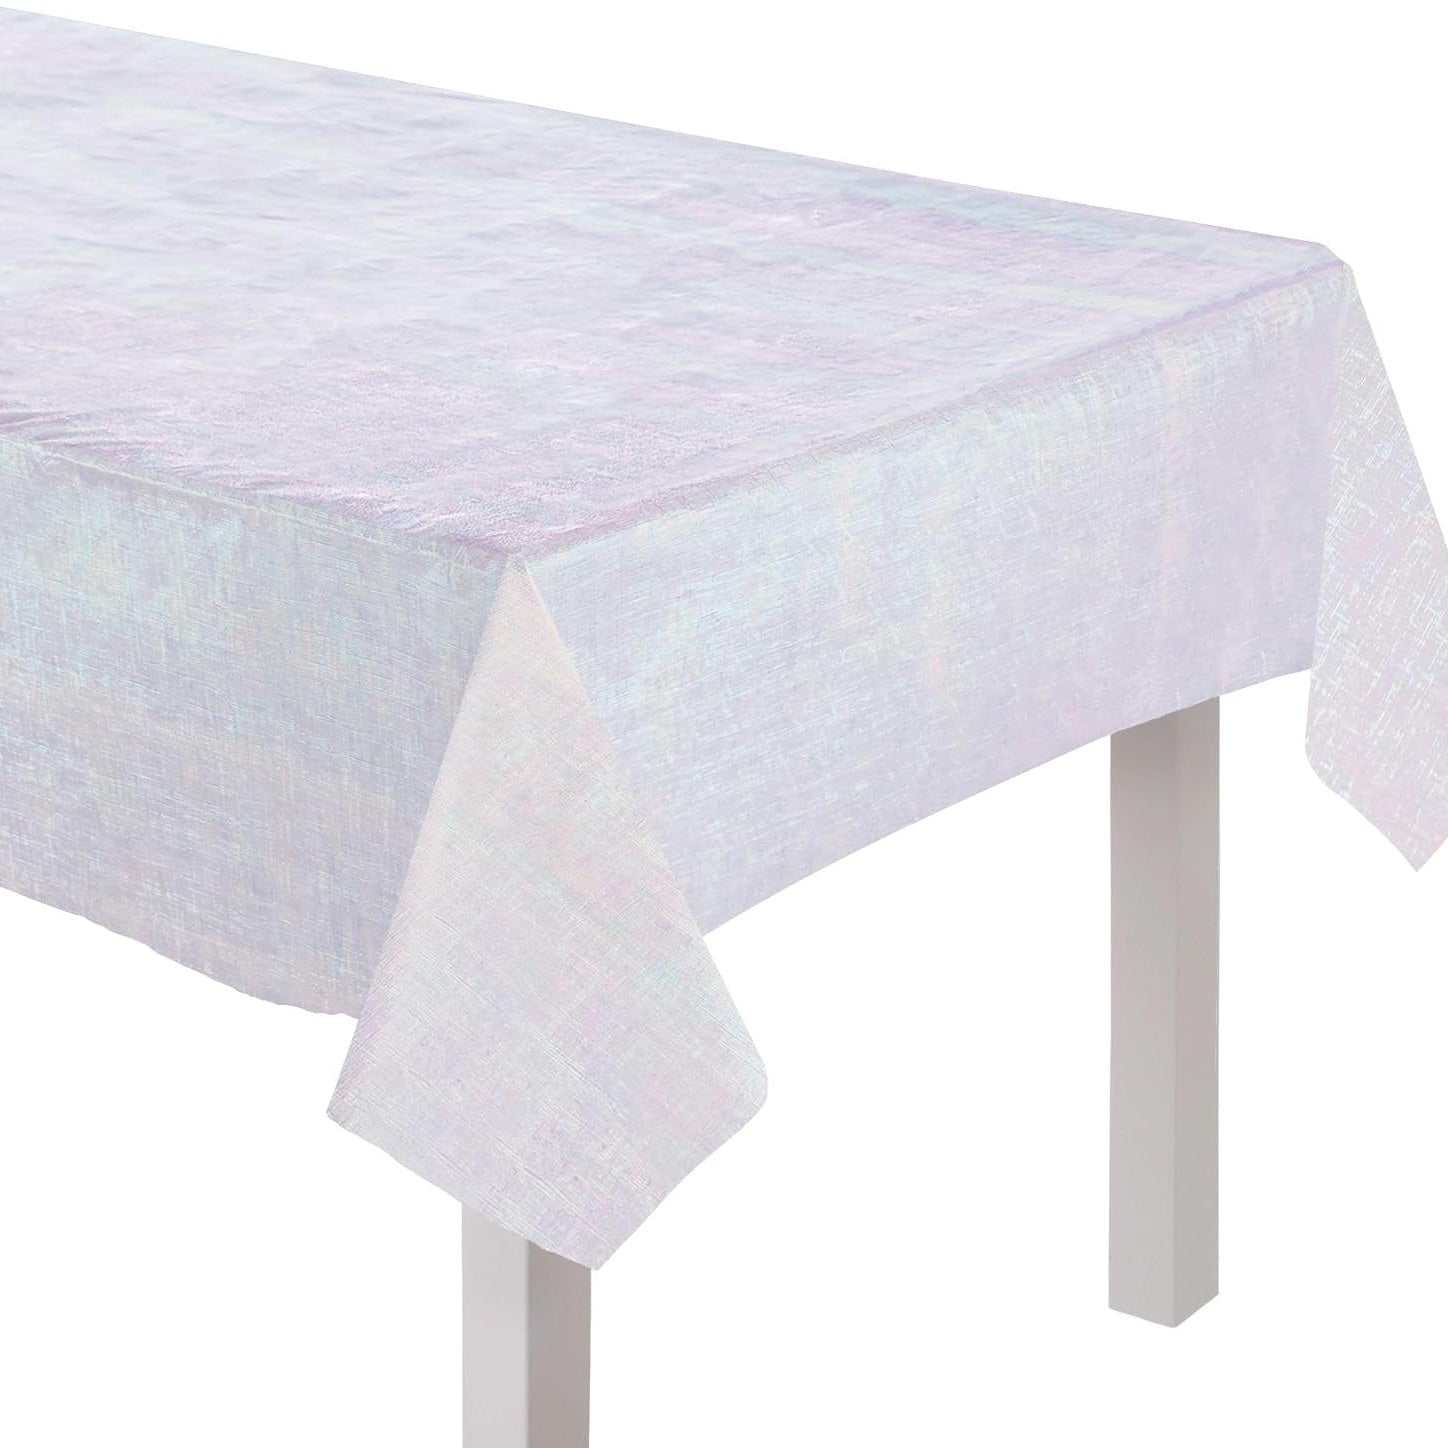 Luminous Birthday Table Cover 54in x 102in